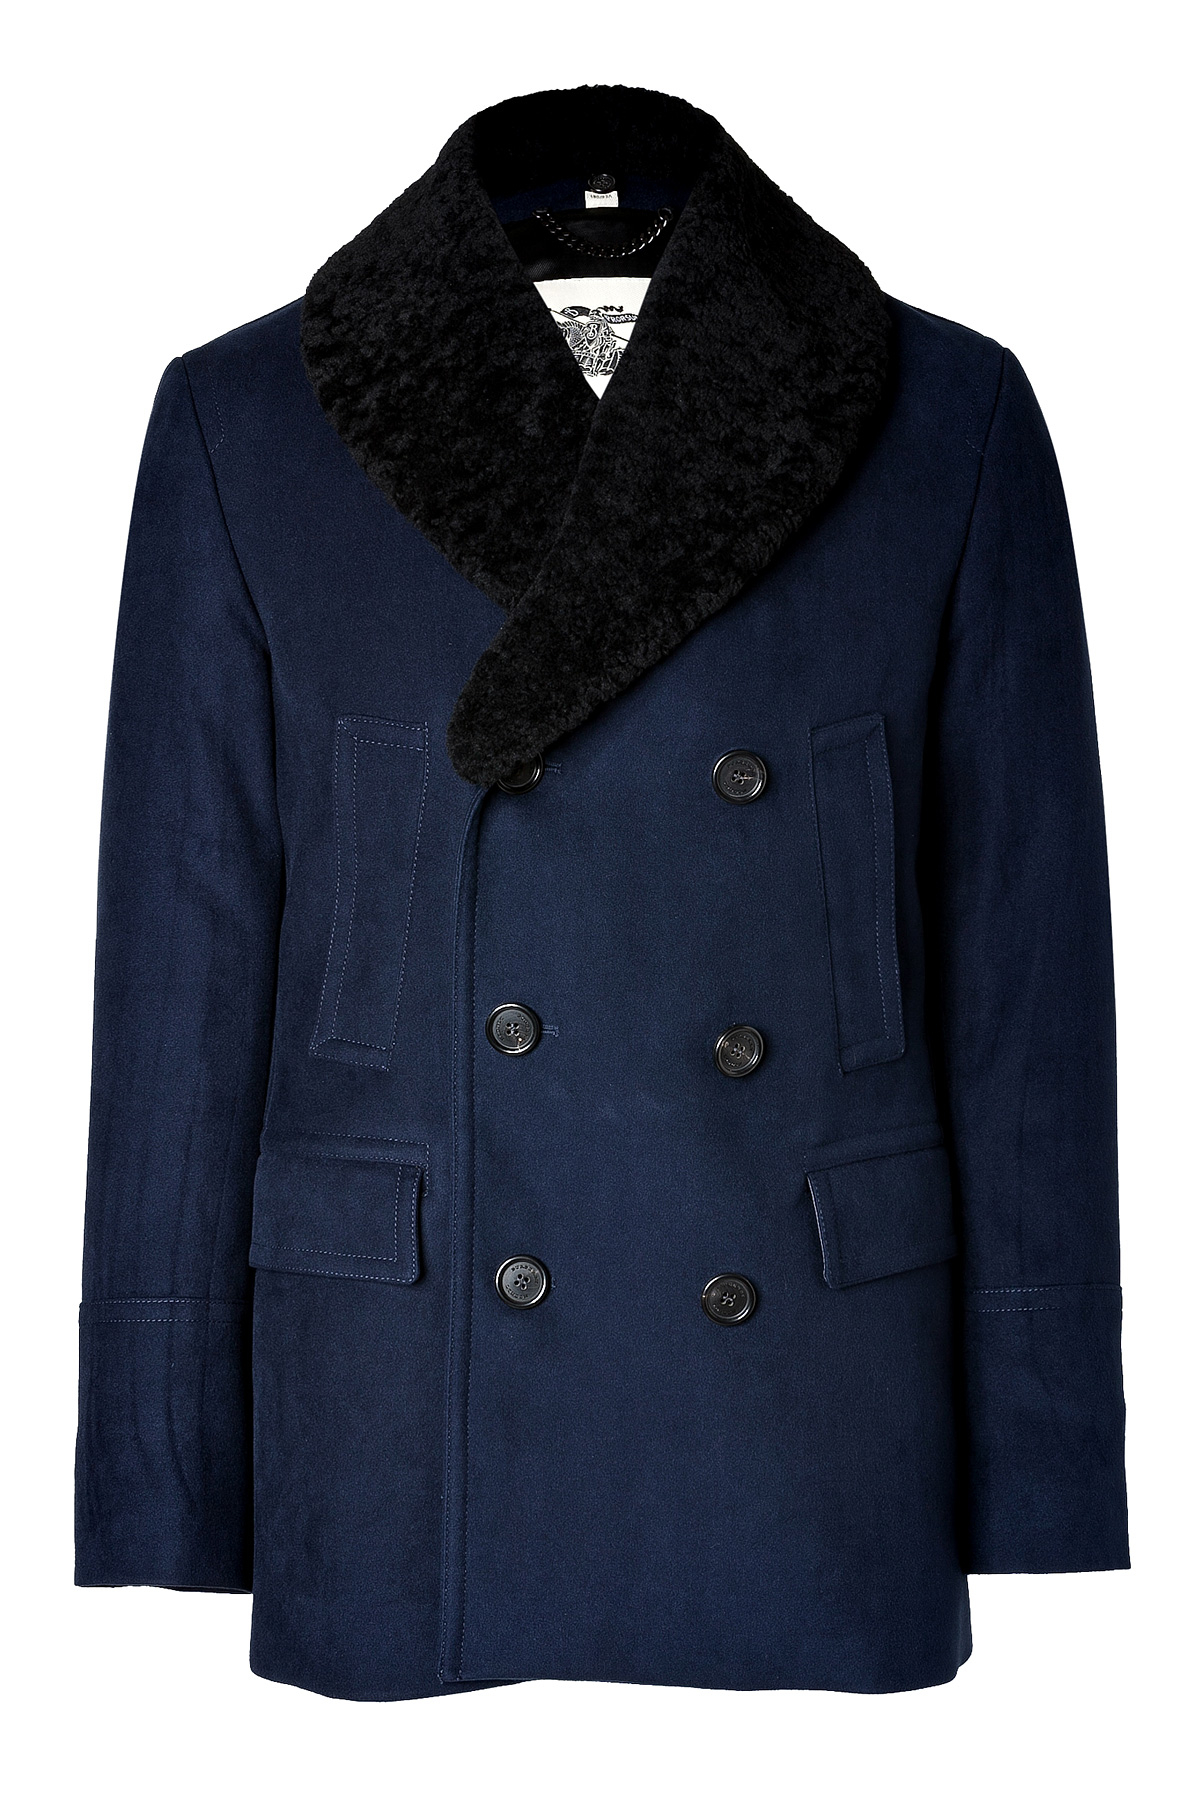 Burberry Bateson Pea Coat With Shearling Collar in Blue | Lyst